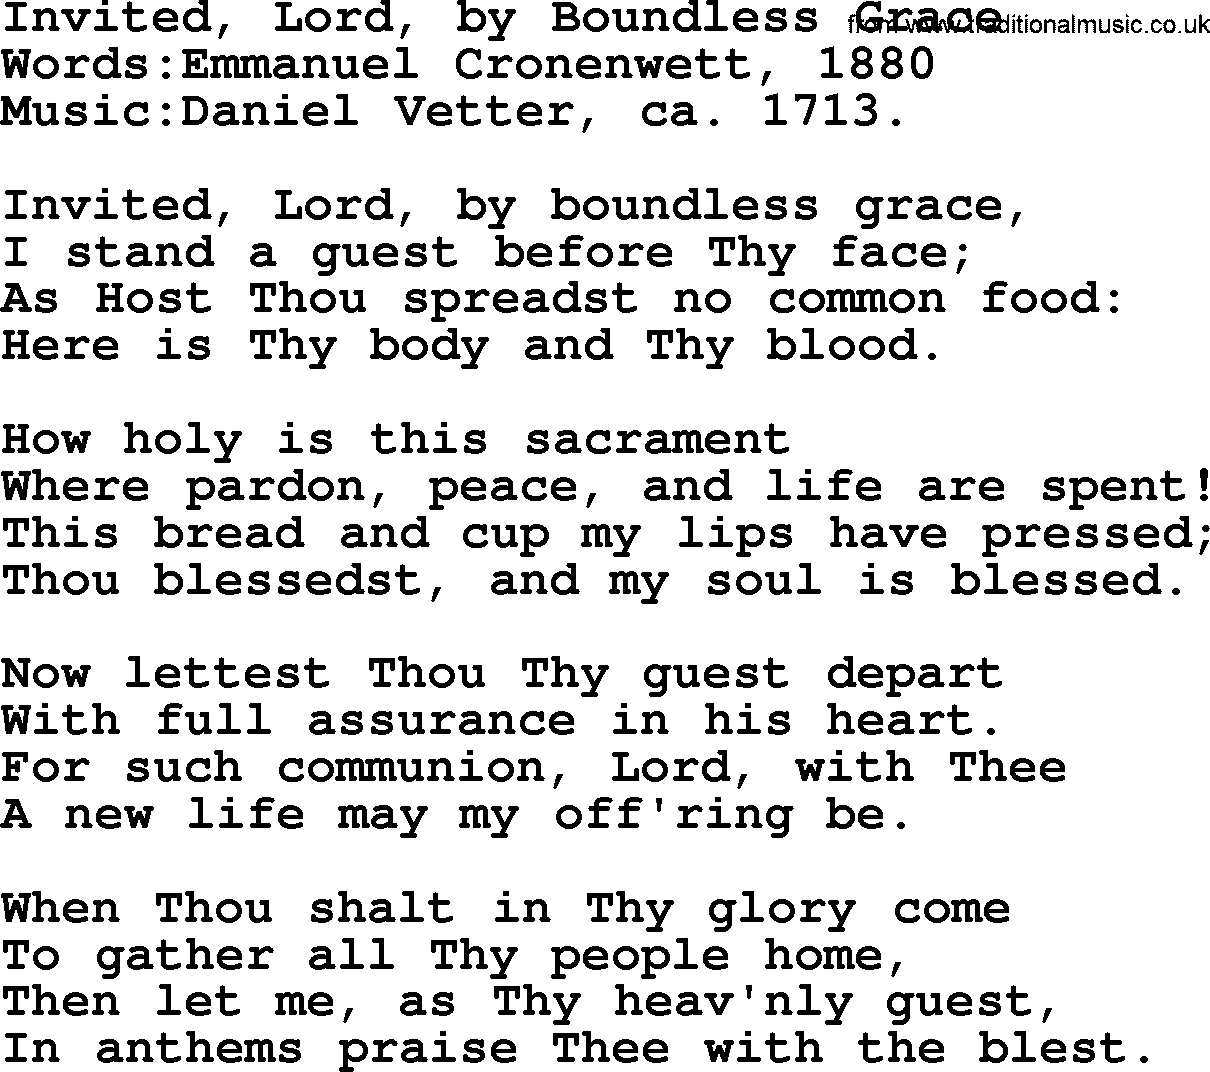 Christian hymns and song lyrics for Communion(The Eucharist): Invited, Lord, By Boundless Grace, lyrics with PDF